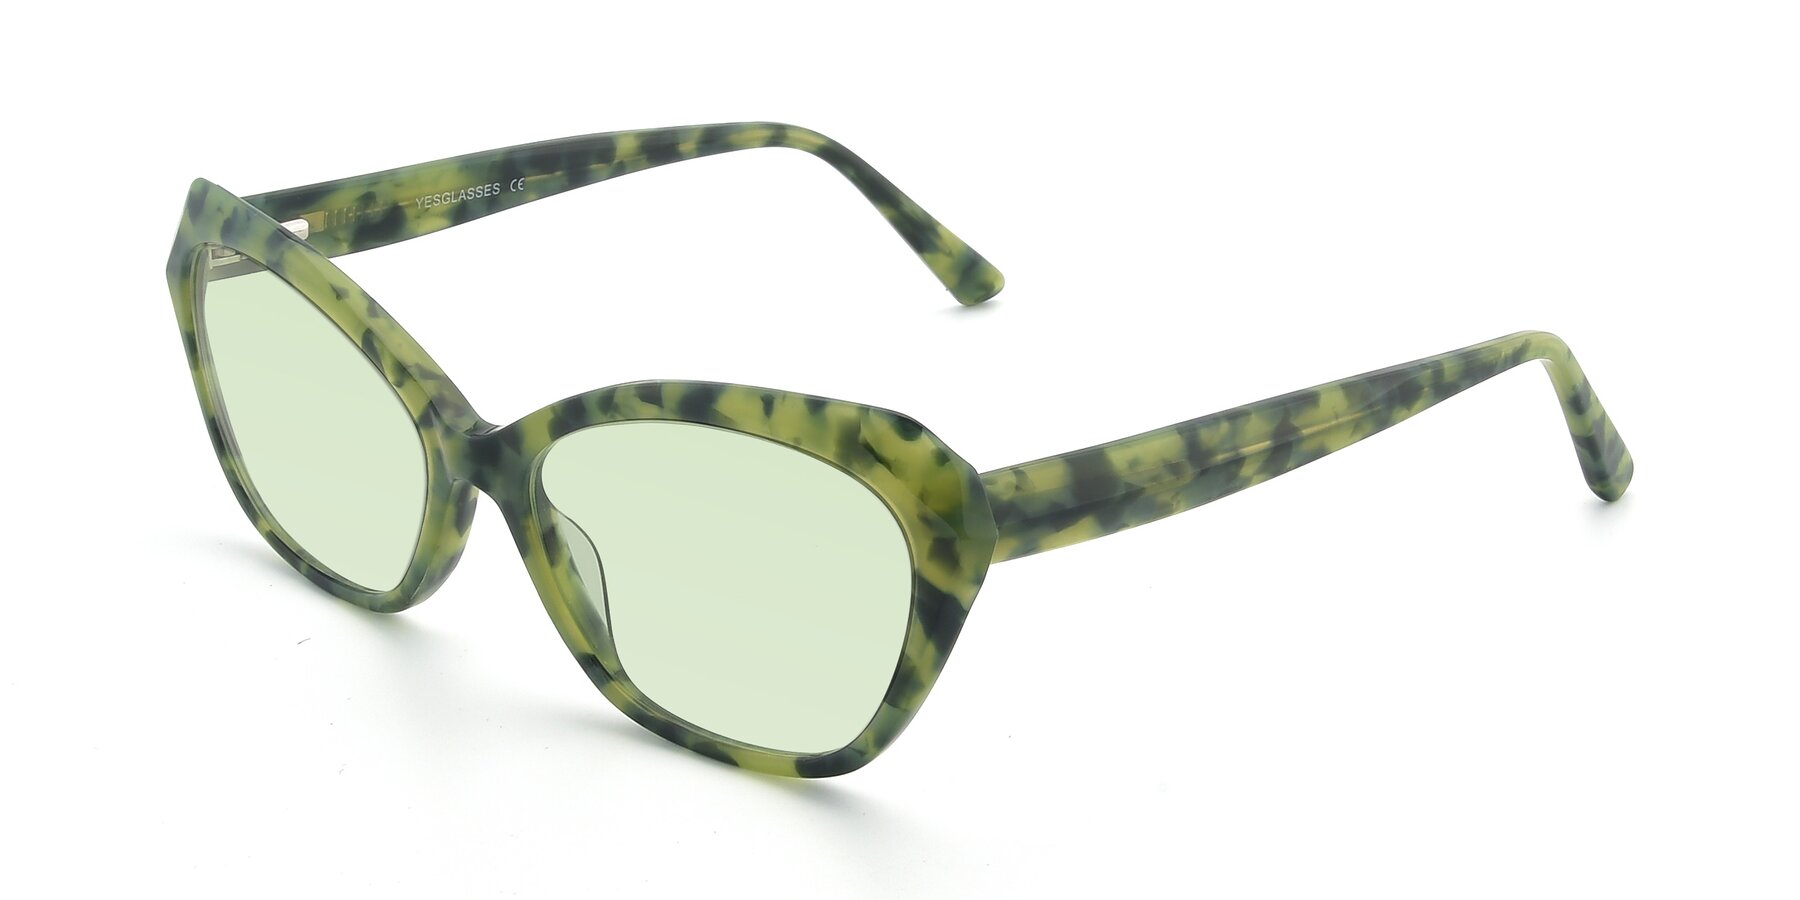 Angle of 17351 in Floral Green with Light Green Tinted Lenses